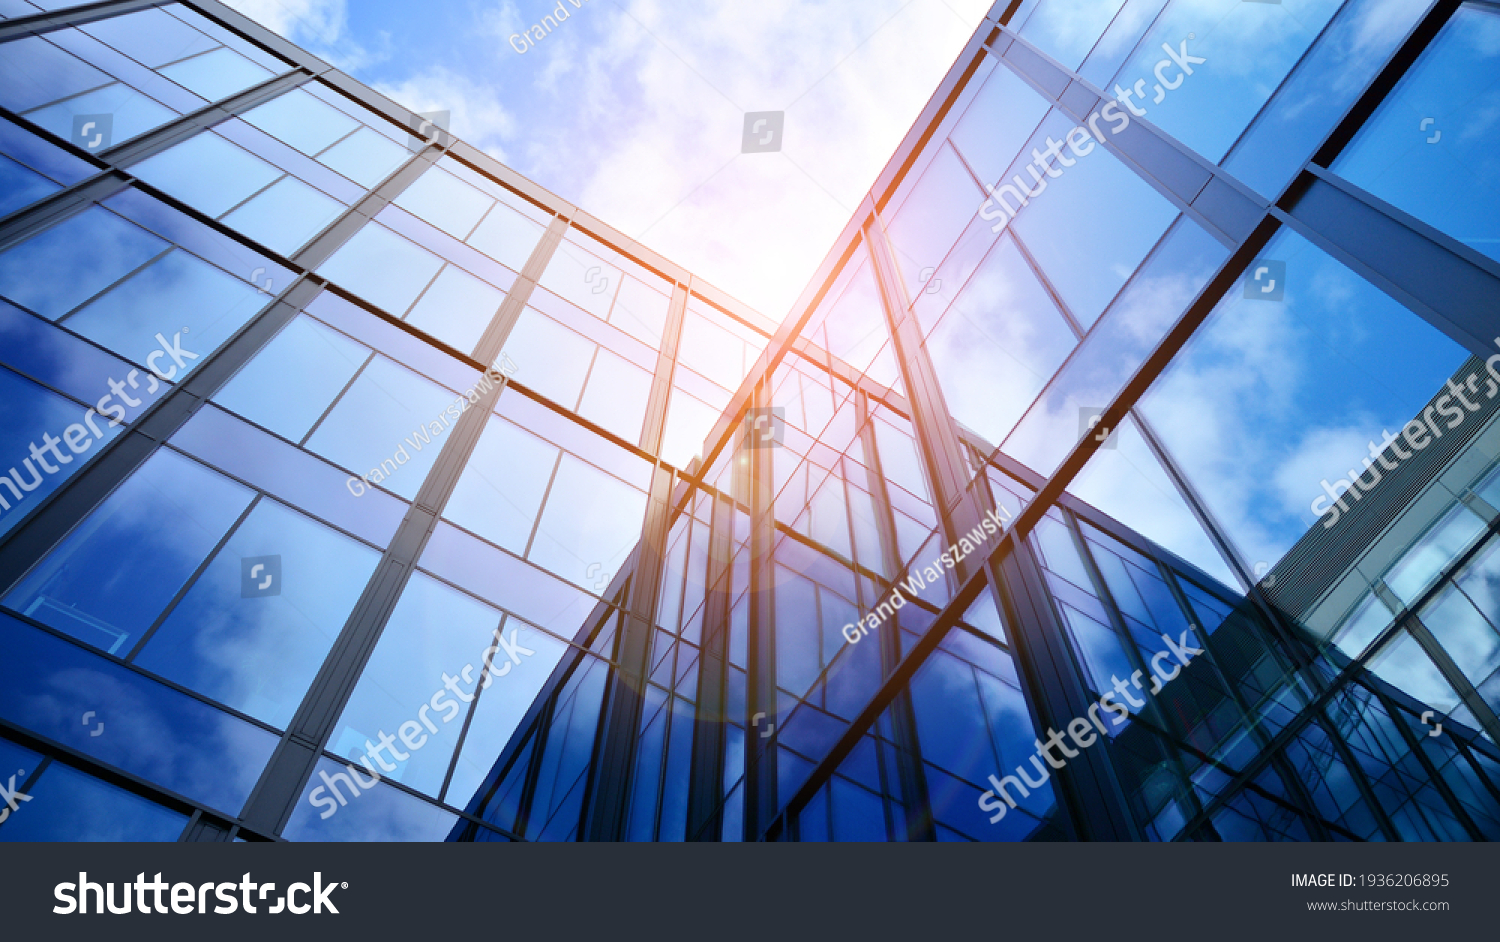 Modern office building with glass facade on a clear sky background. Transparent glass wall of office building. #1936206895